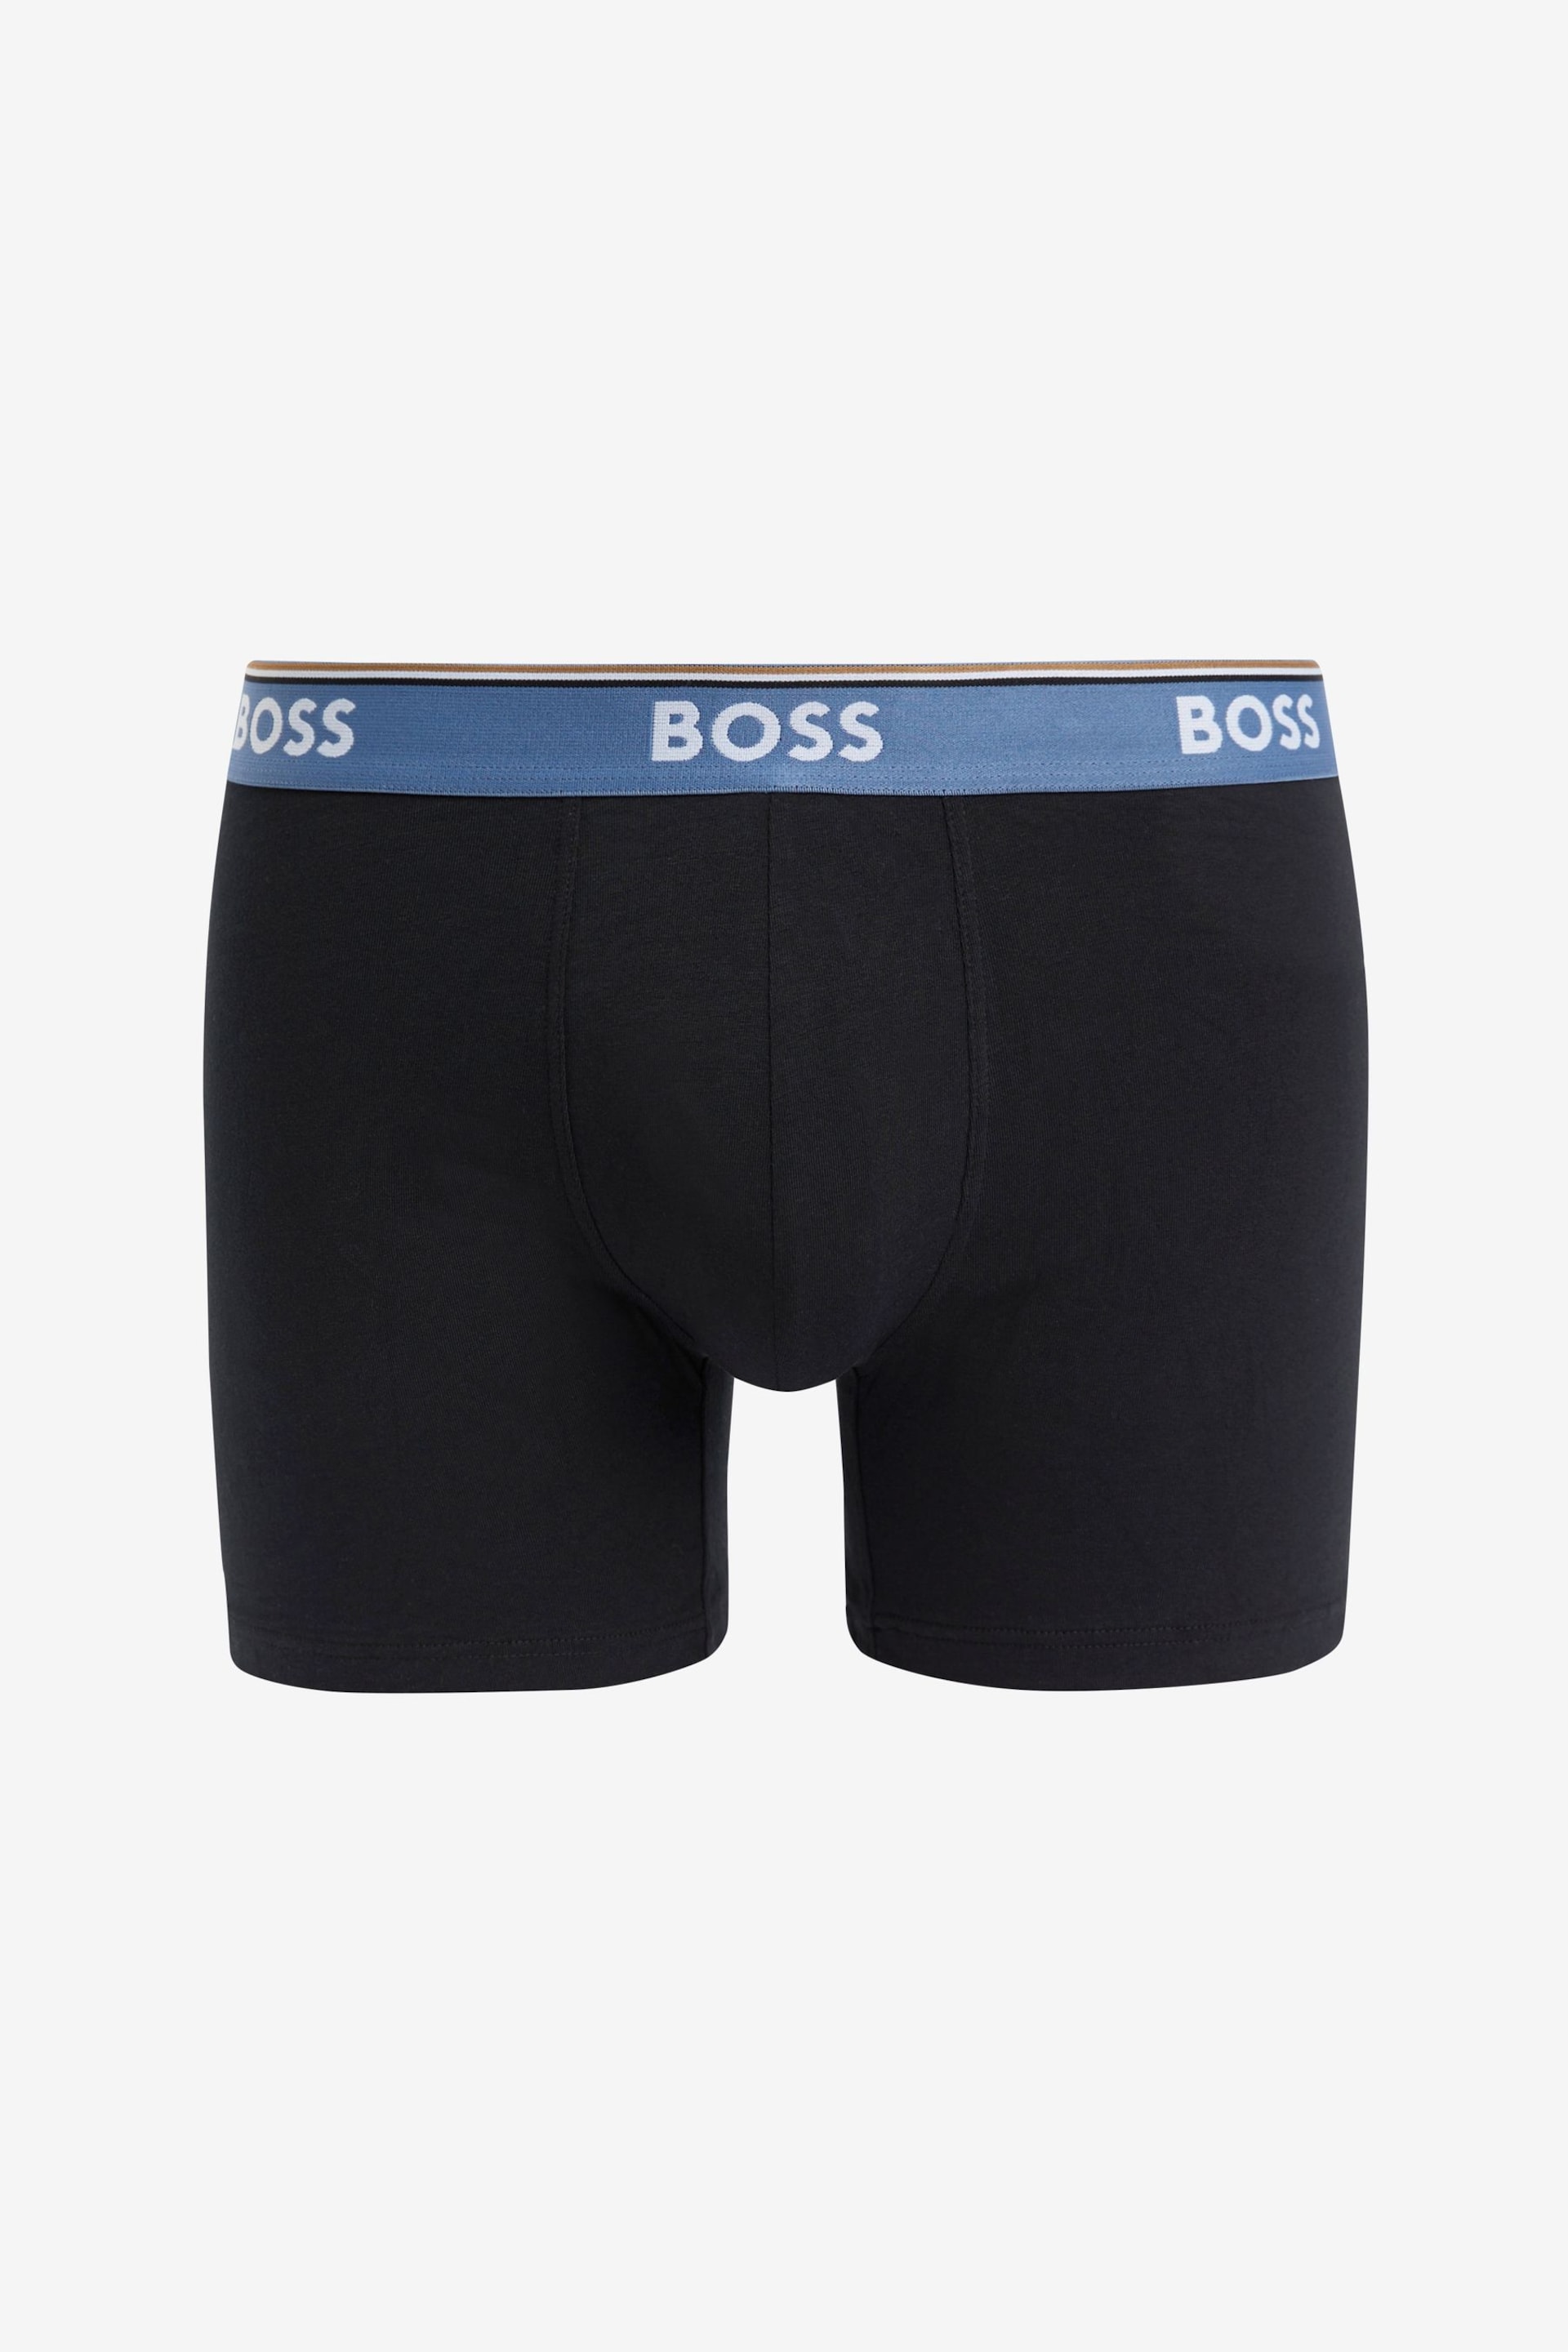 BOSS Black of Stretch-Cotton Boxer Briefs 3 Pack With Logos - Image 3 of 10